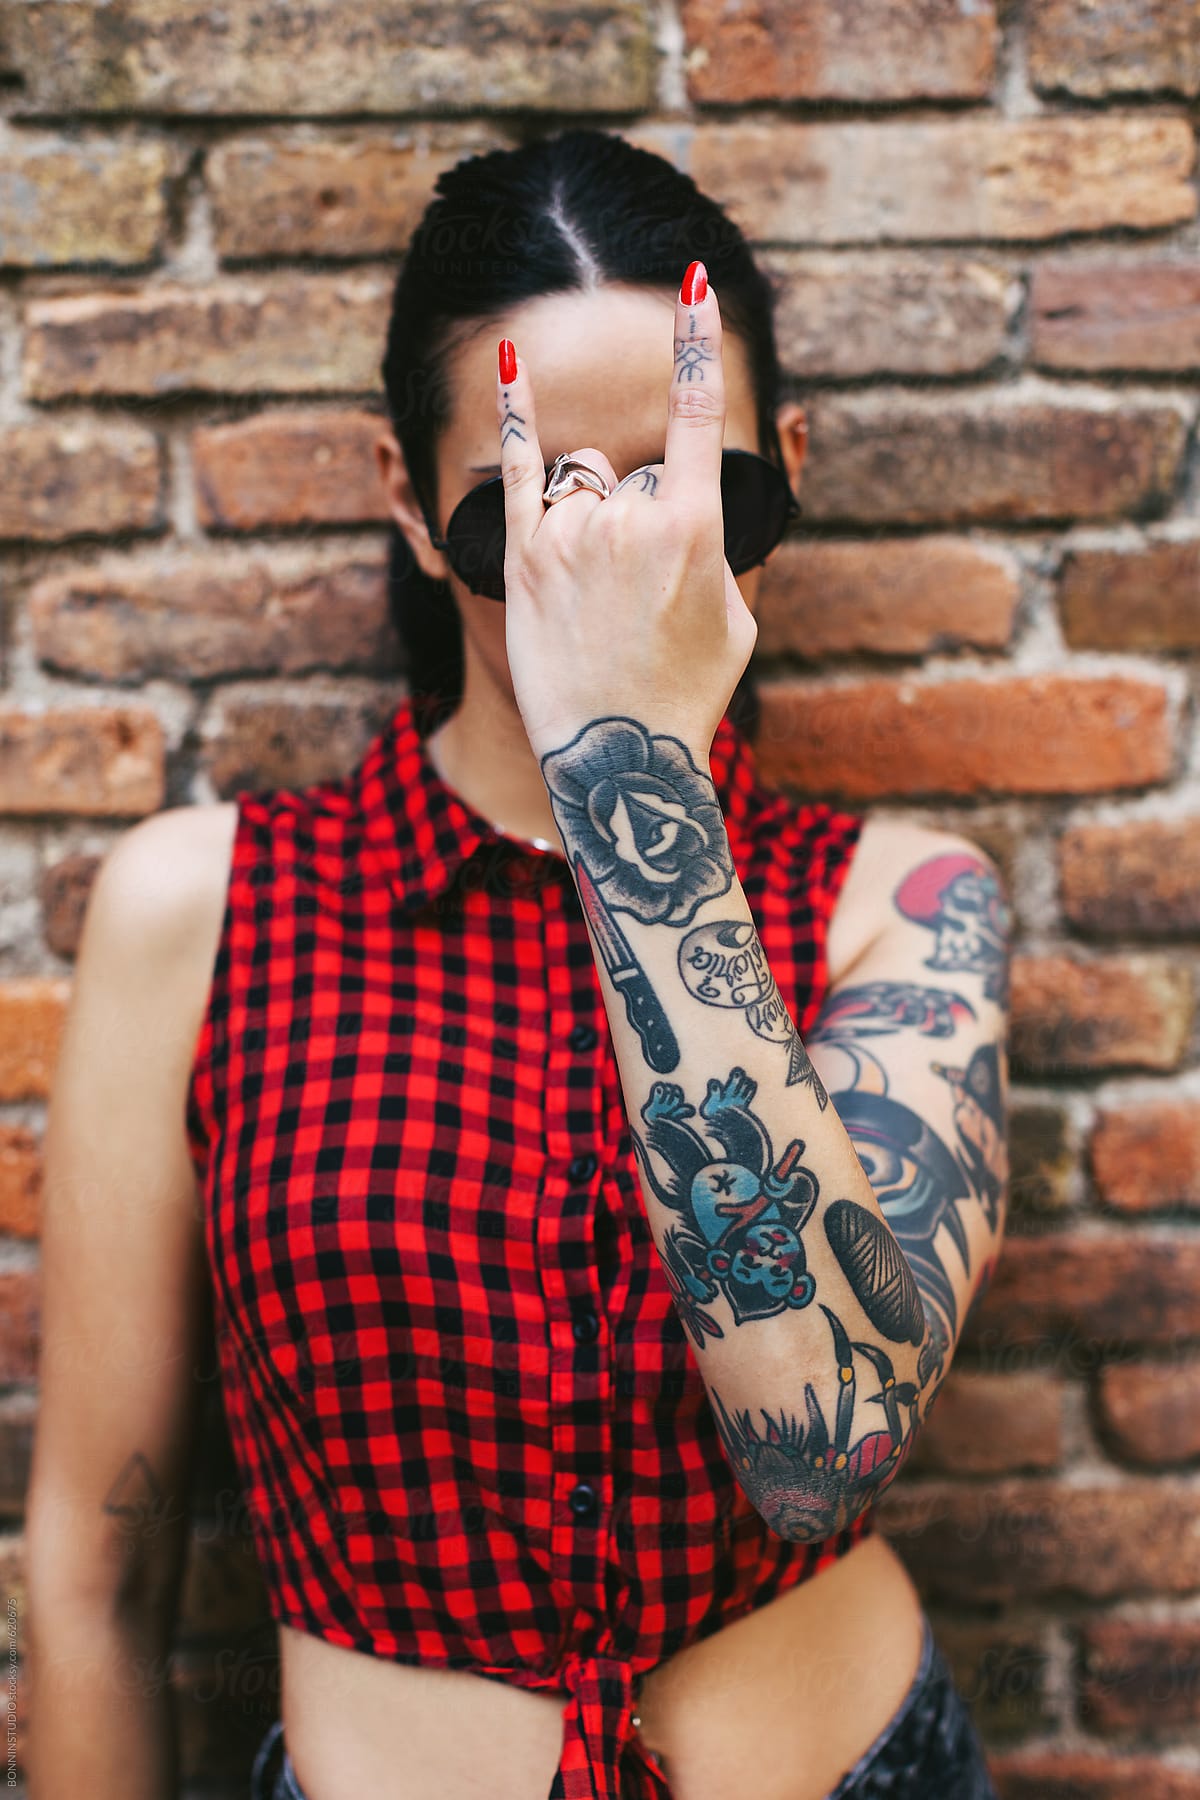 Young alternative woman with tattoos covering her face with a heavy metal sign.